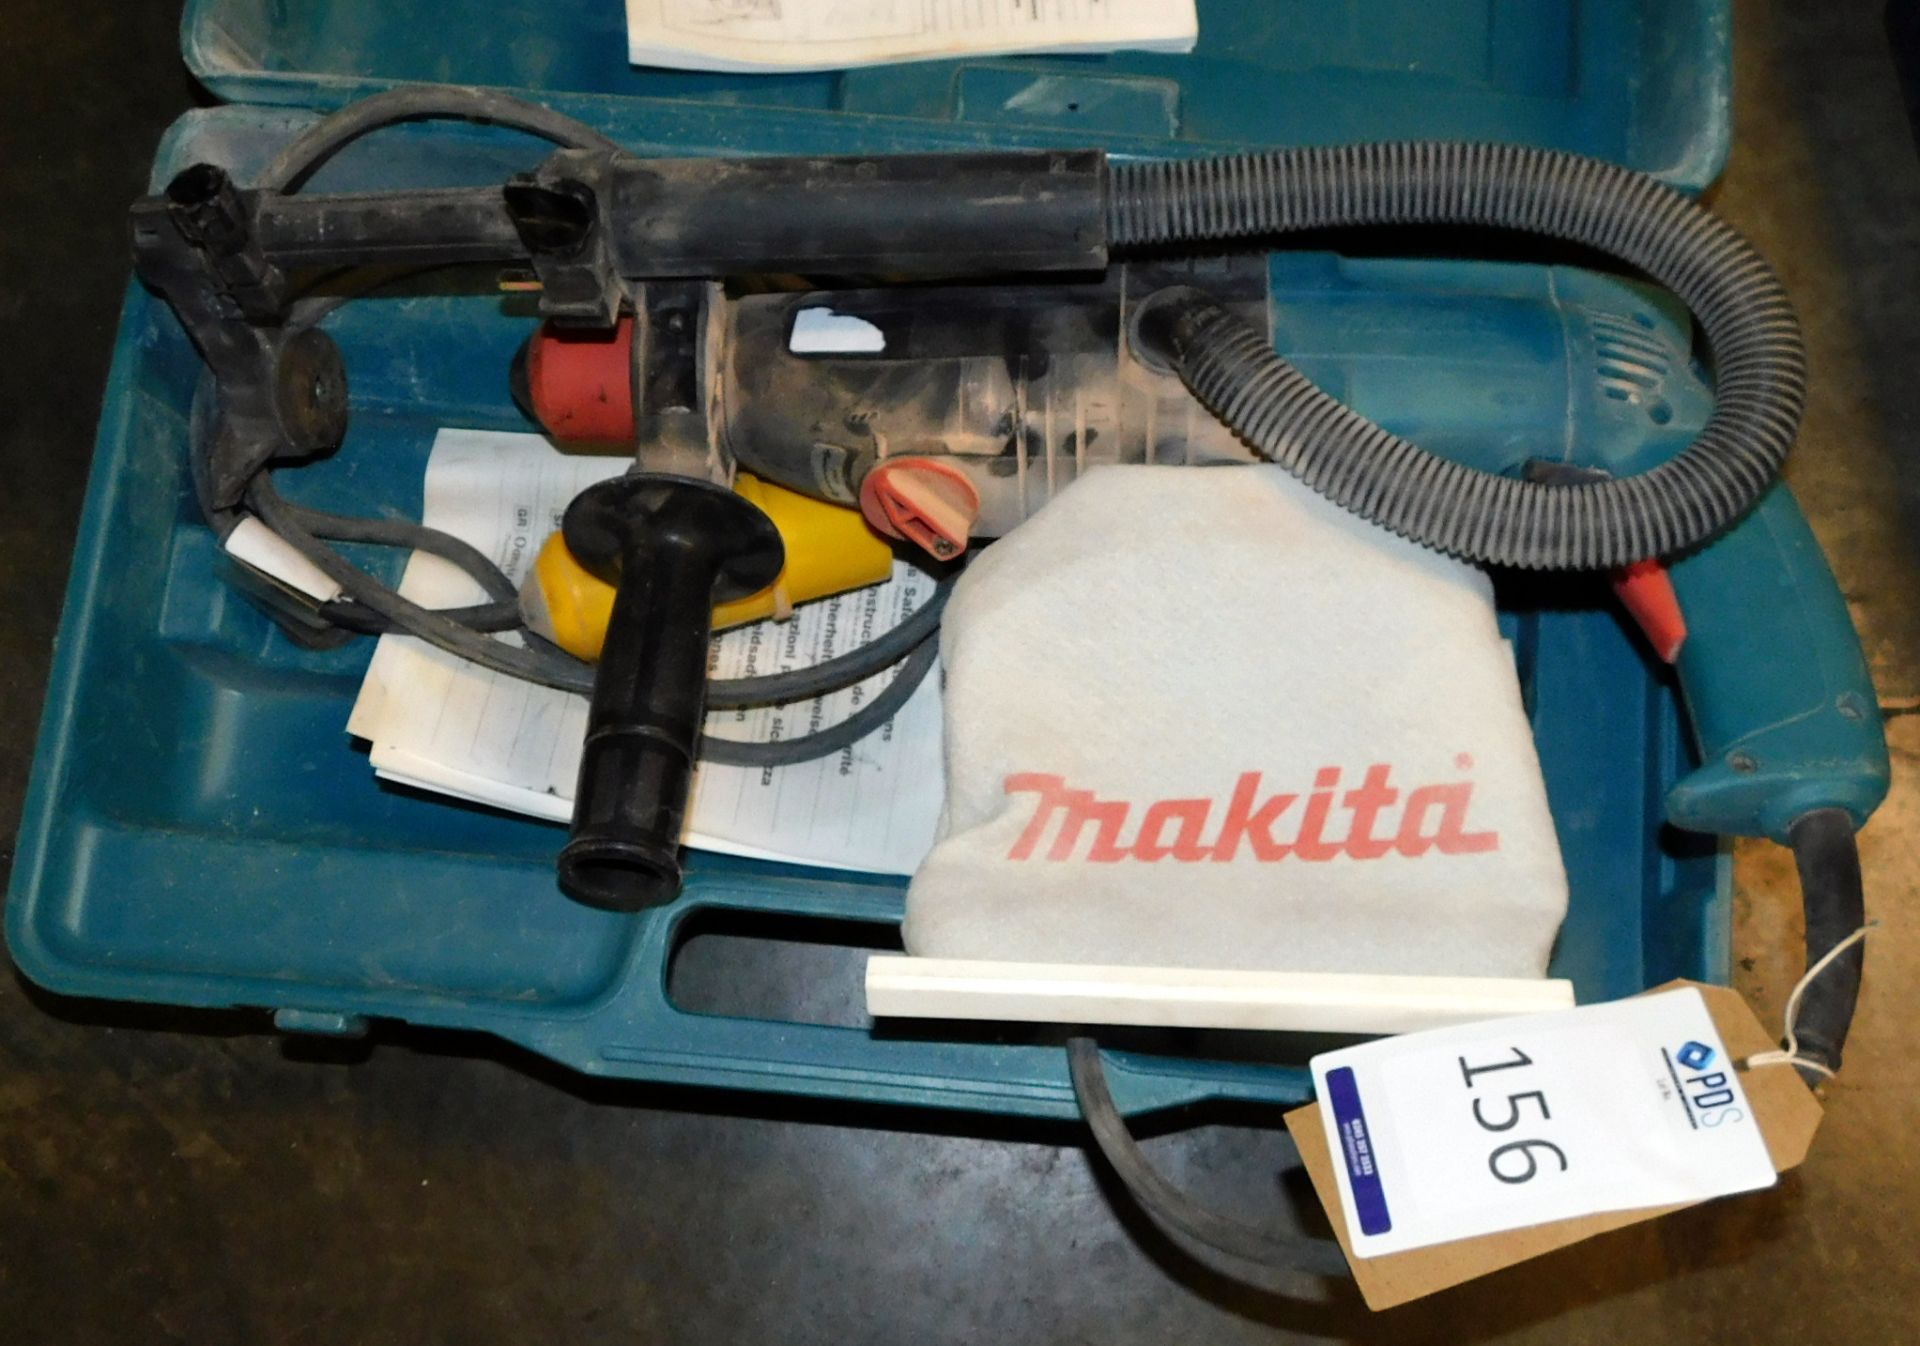 Makita HR2430 Hammer Drill, 110v (Located Unit G, Harlow House, Shelton Road, Willowbrook Industrial